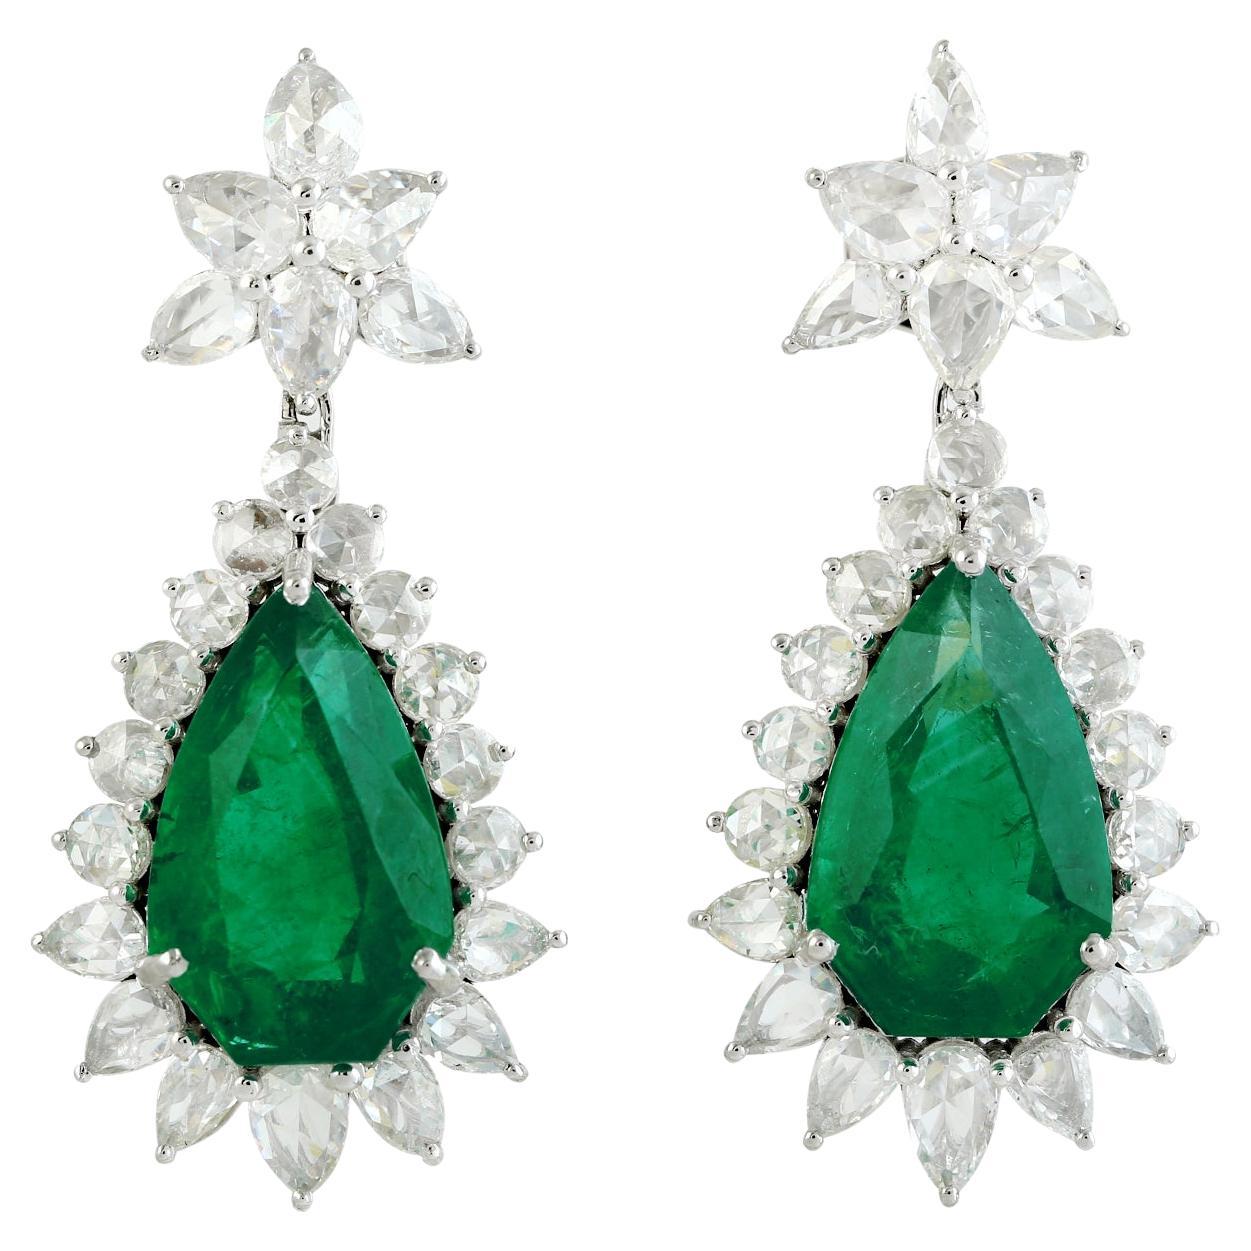 14.80ct Pear Shaped Emerald Dangle Earrings With Diamonds Made In 18k Gold